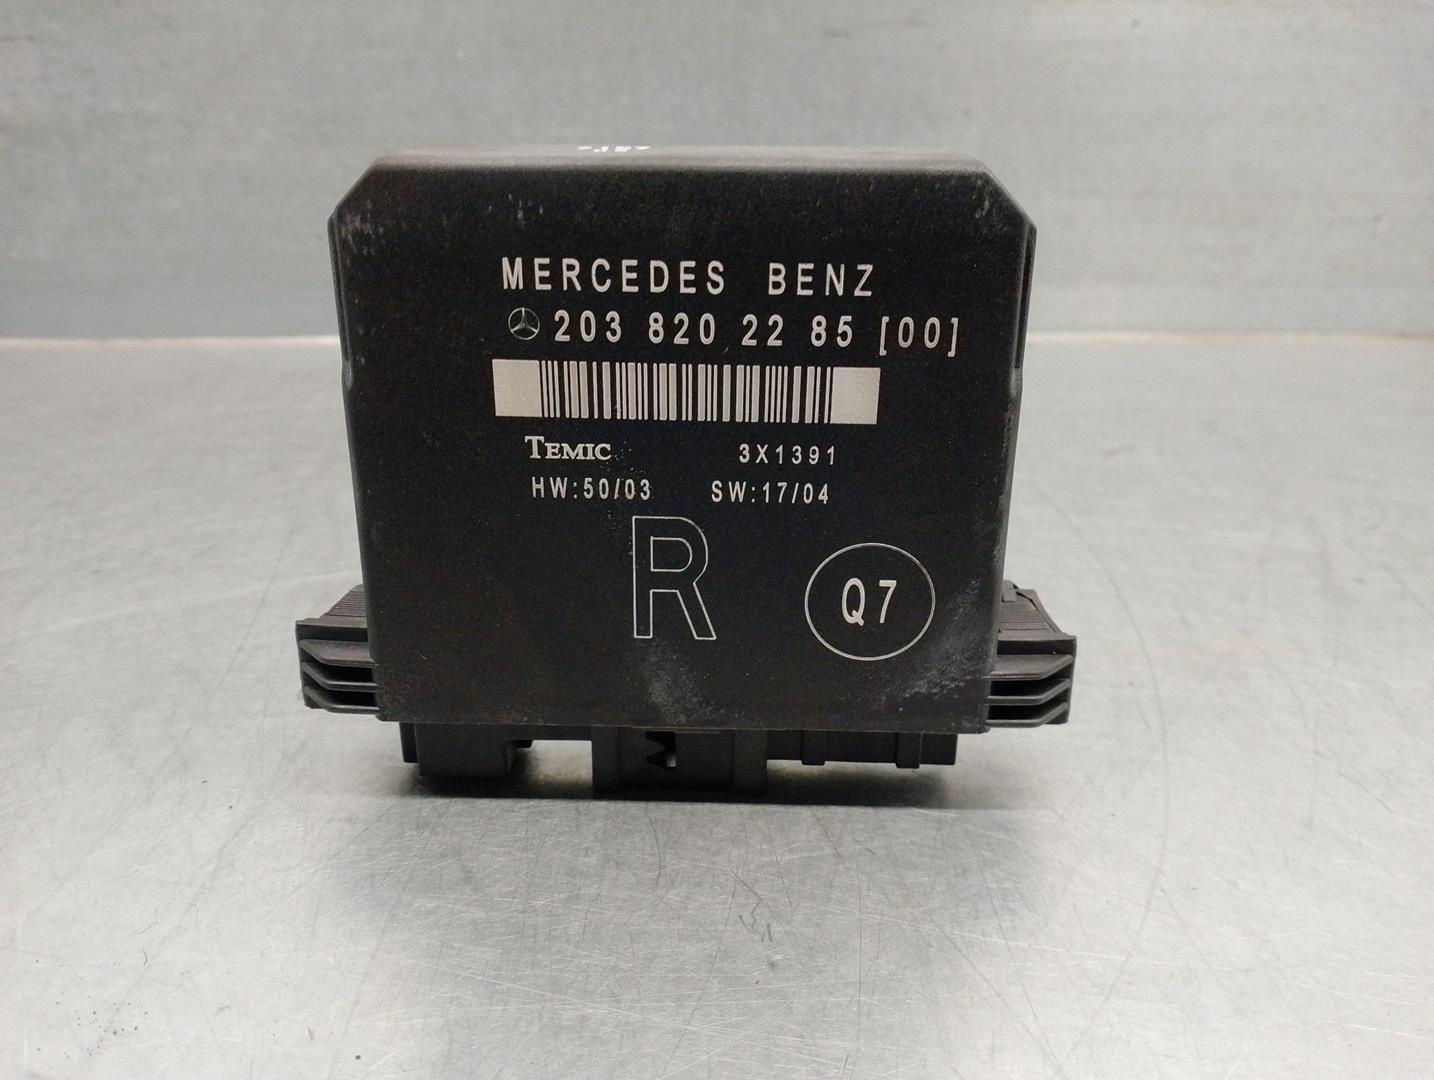 MERCEDES-BENZ C-Class W203/S203/CL203 (2000-2008) Other Control Units 2038202285, 3X1391, TEMIC 19916589